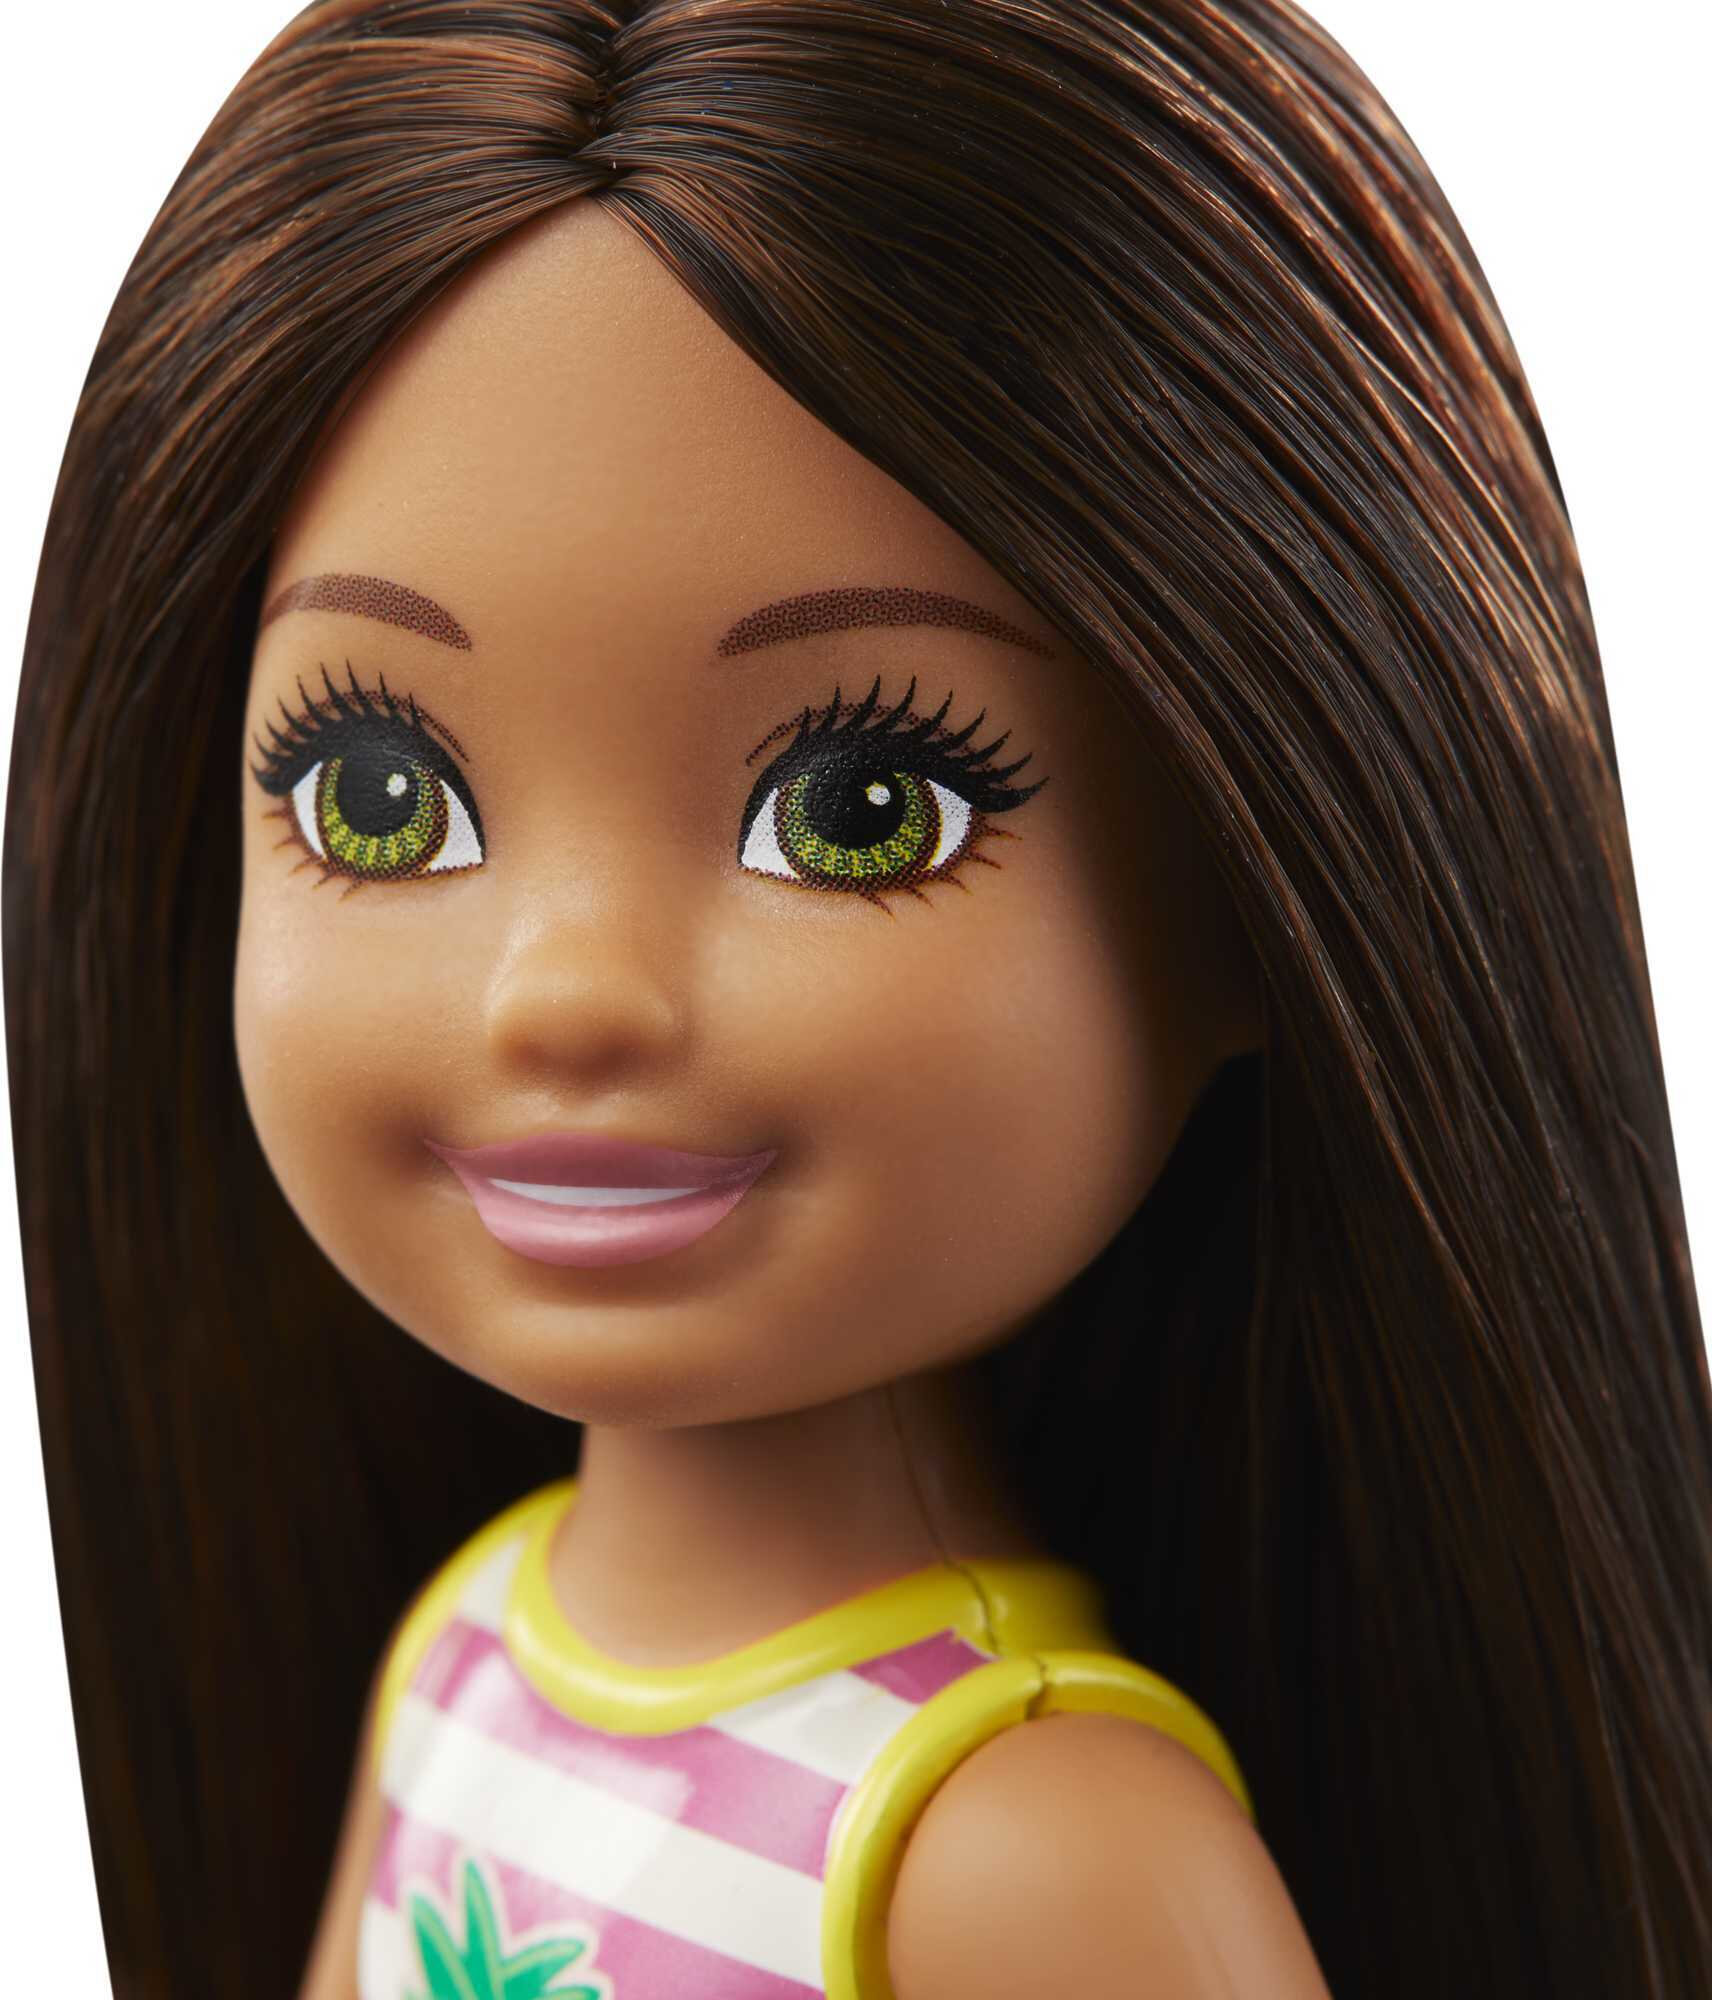 Barbie Club Chelsea Doll, Small Doll with Long Brown Hair, Green Eyes & Pineapple-Graphic Swimsuit - image 2 of 5